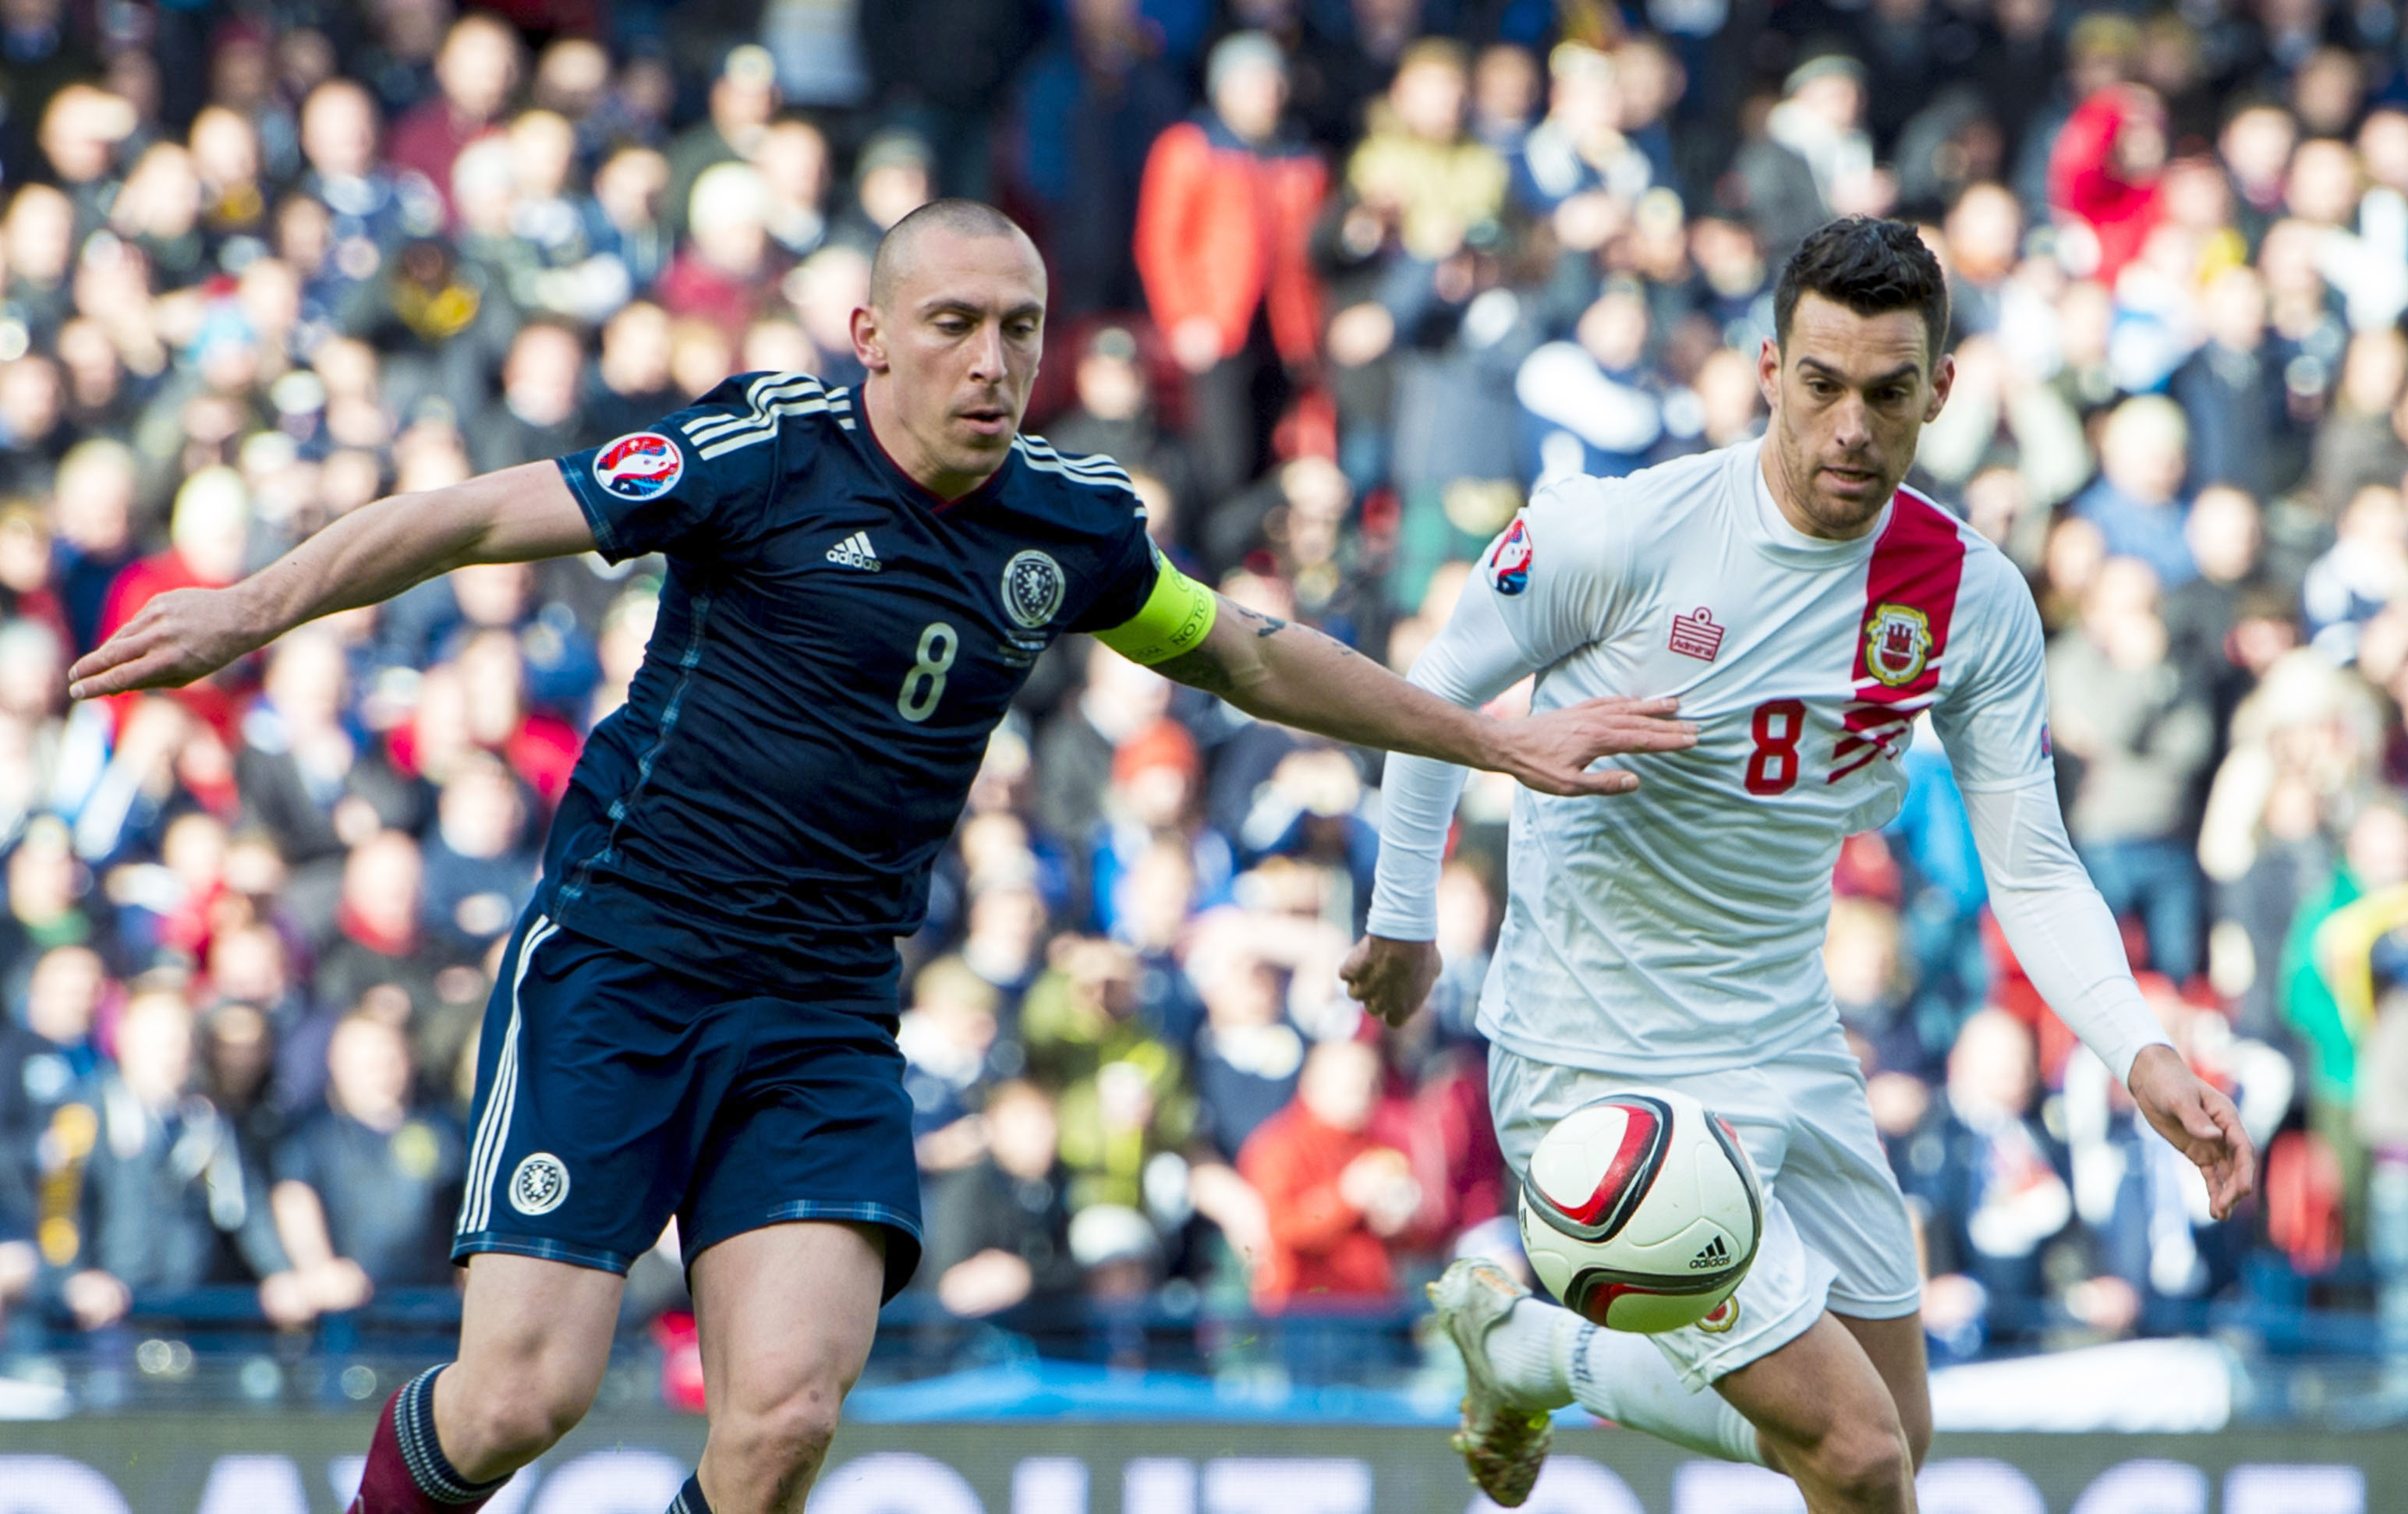 Scotland in action against Gibraltar at Hampden in March 2015.